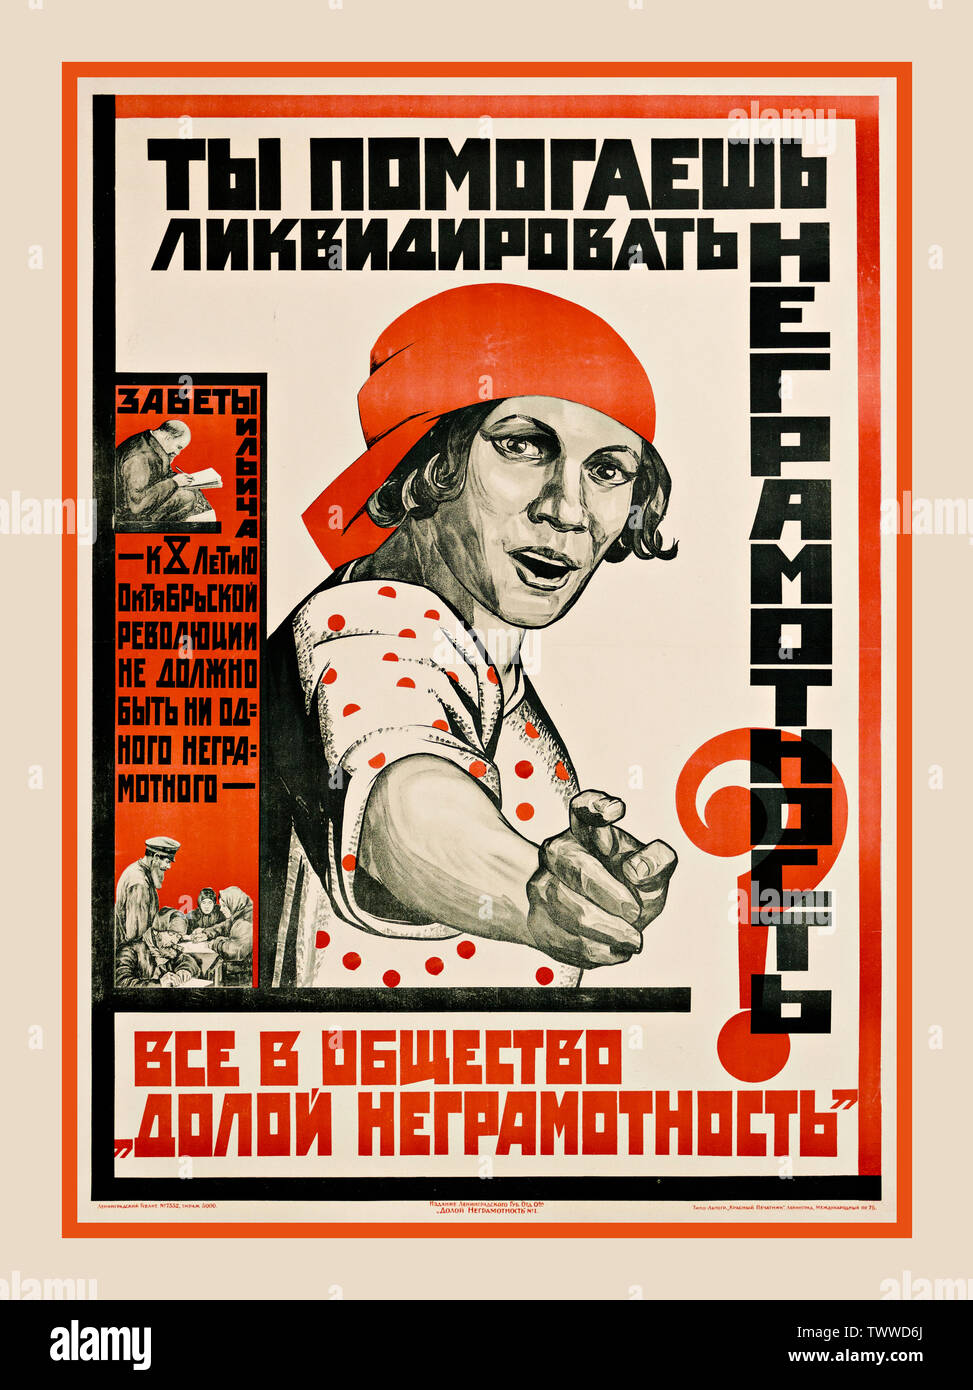 Vintage 1920’s Soviet Union Russian Propaganda Poster “Are you helping to eliminate illiteracy? All in society 'Down with illiteracy'. ' Leningrad Publication of the Society Down with Illiteracy, 1925. Chromolithograph 1925 USSR Stock Photo